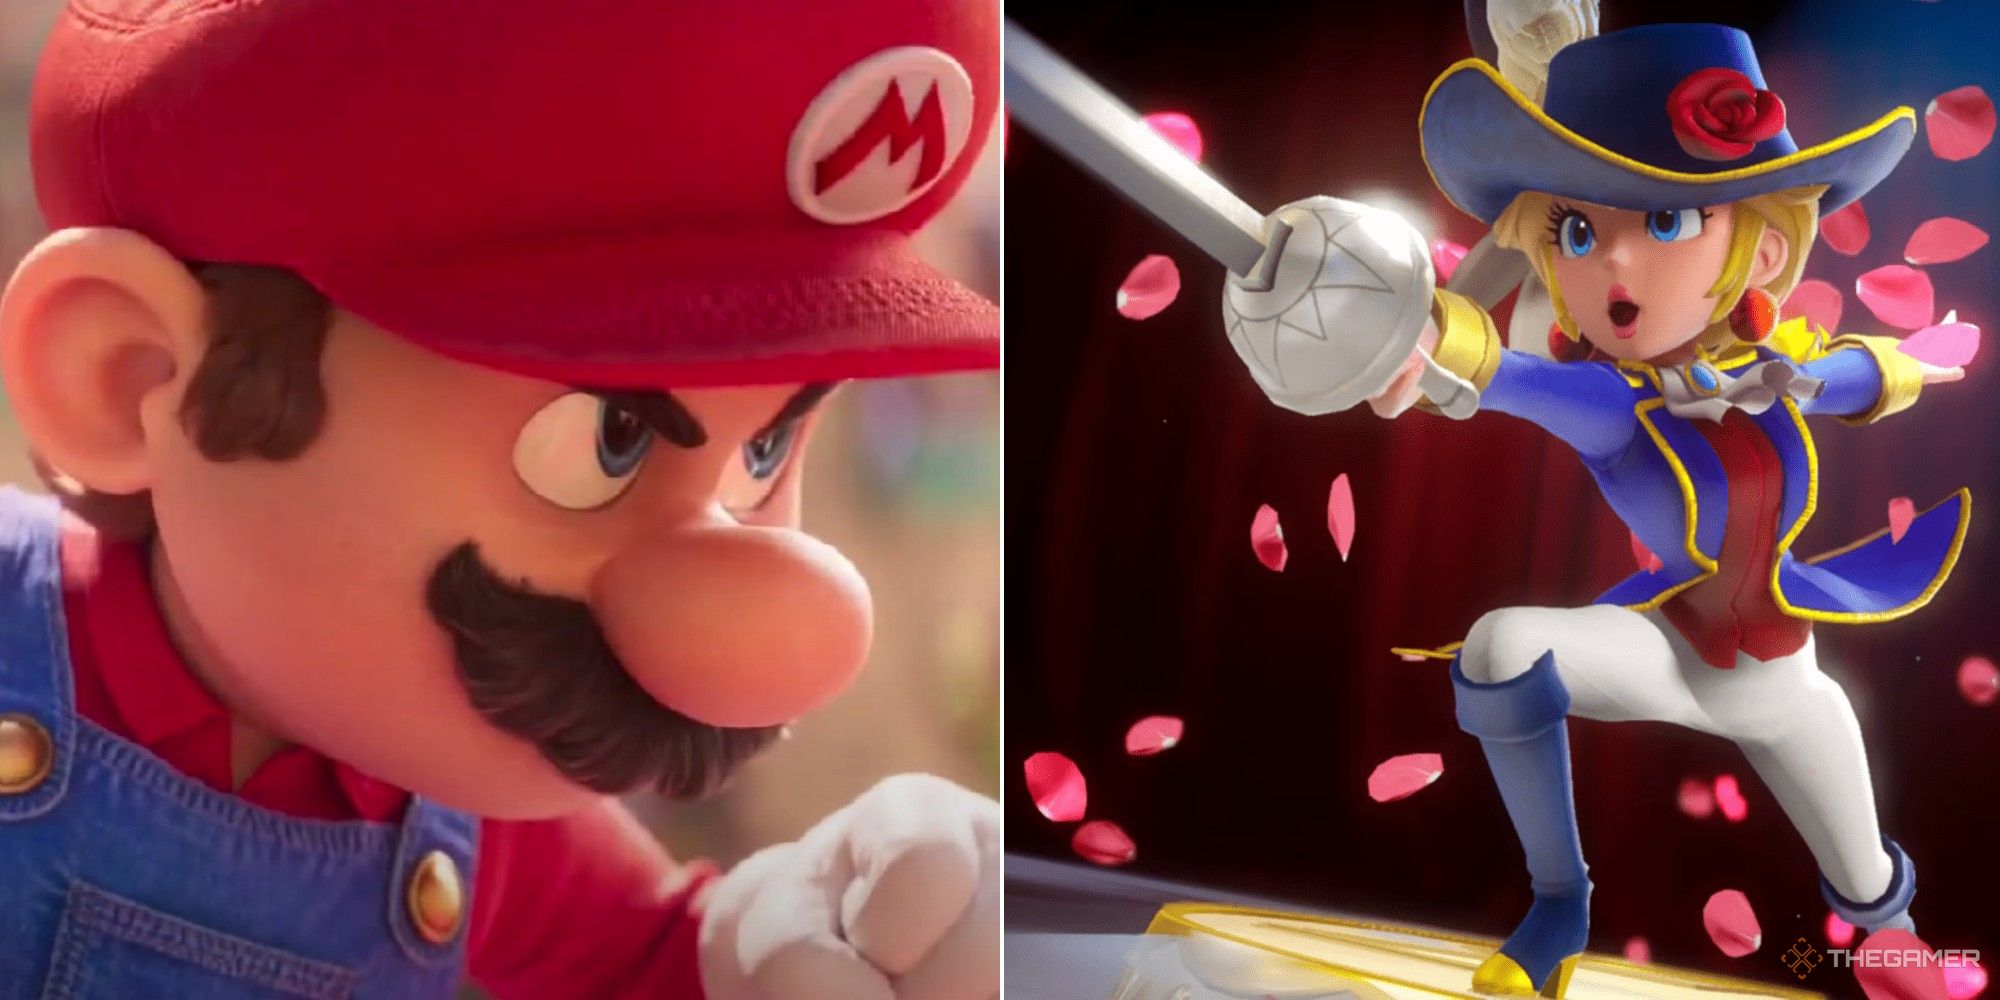 Collague showing Mario from the 2023 Mario movie and princess peach in swordfighter form from the showtime video game